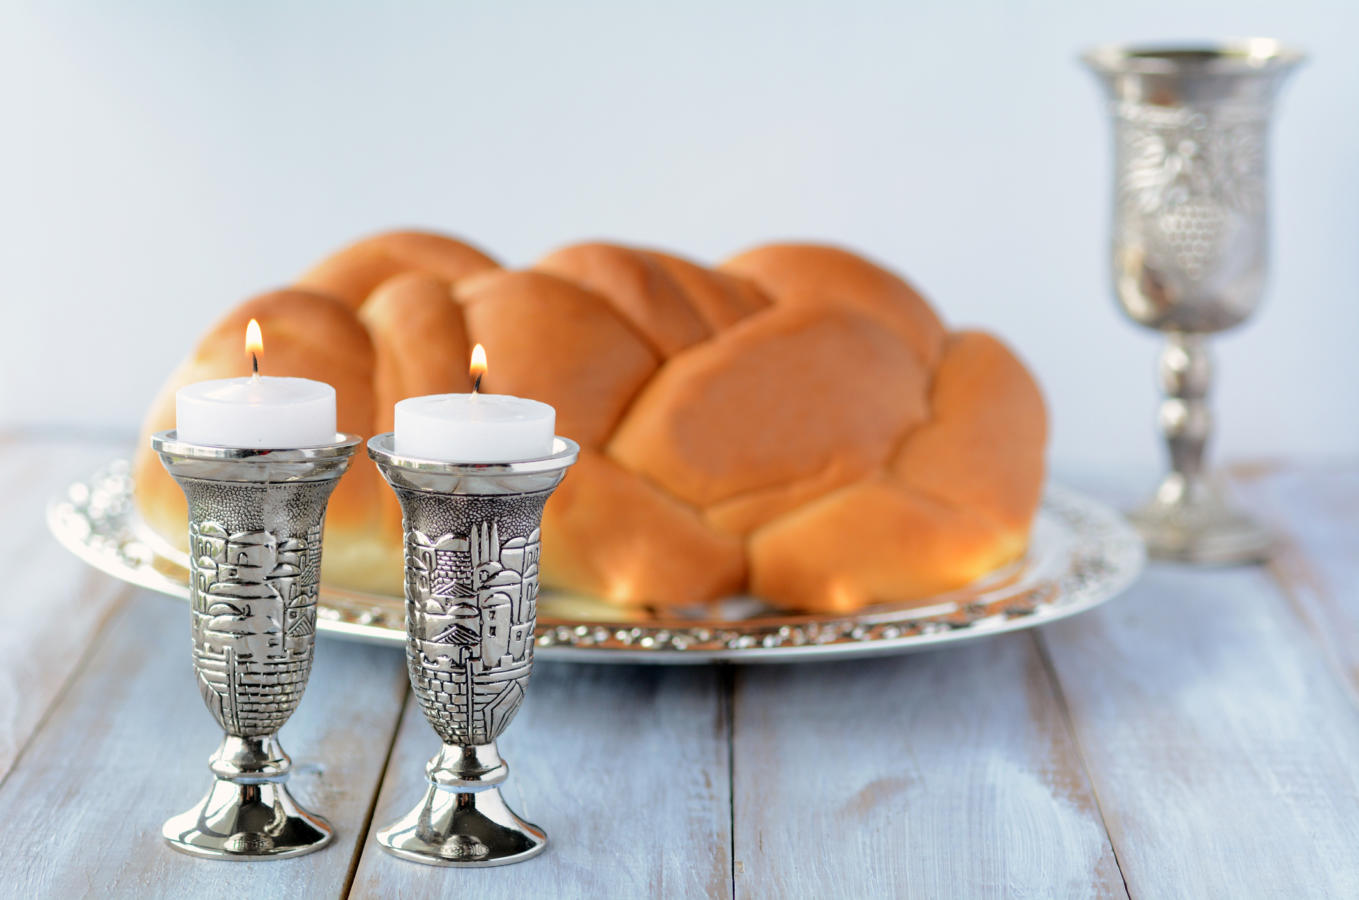 Ask The Expert: When Does Shabbat Start? | My Jewish Learning